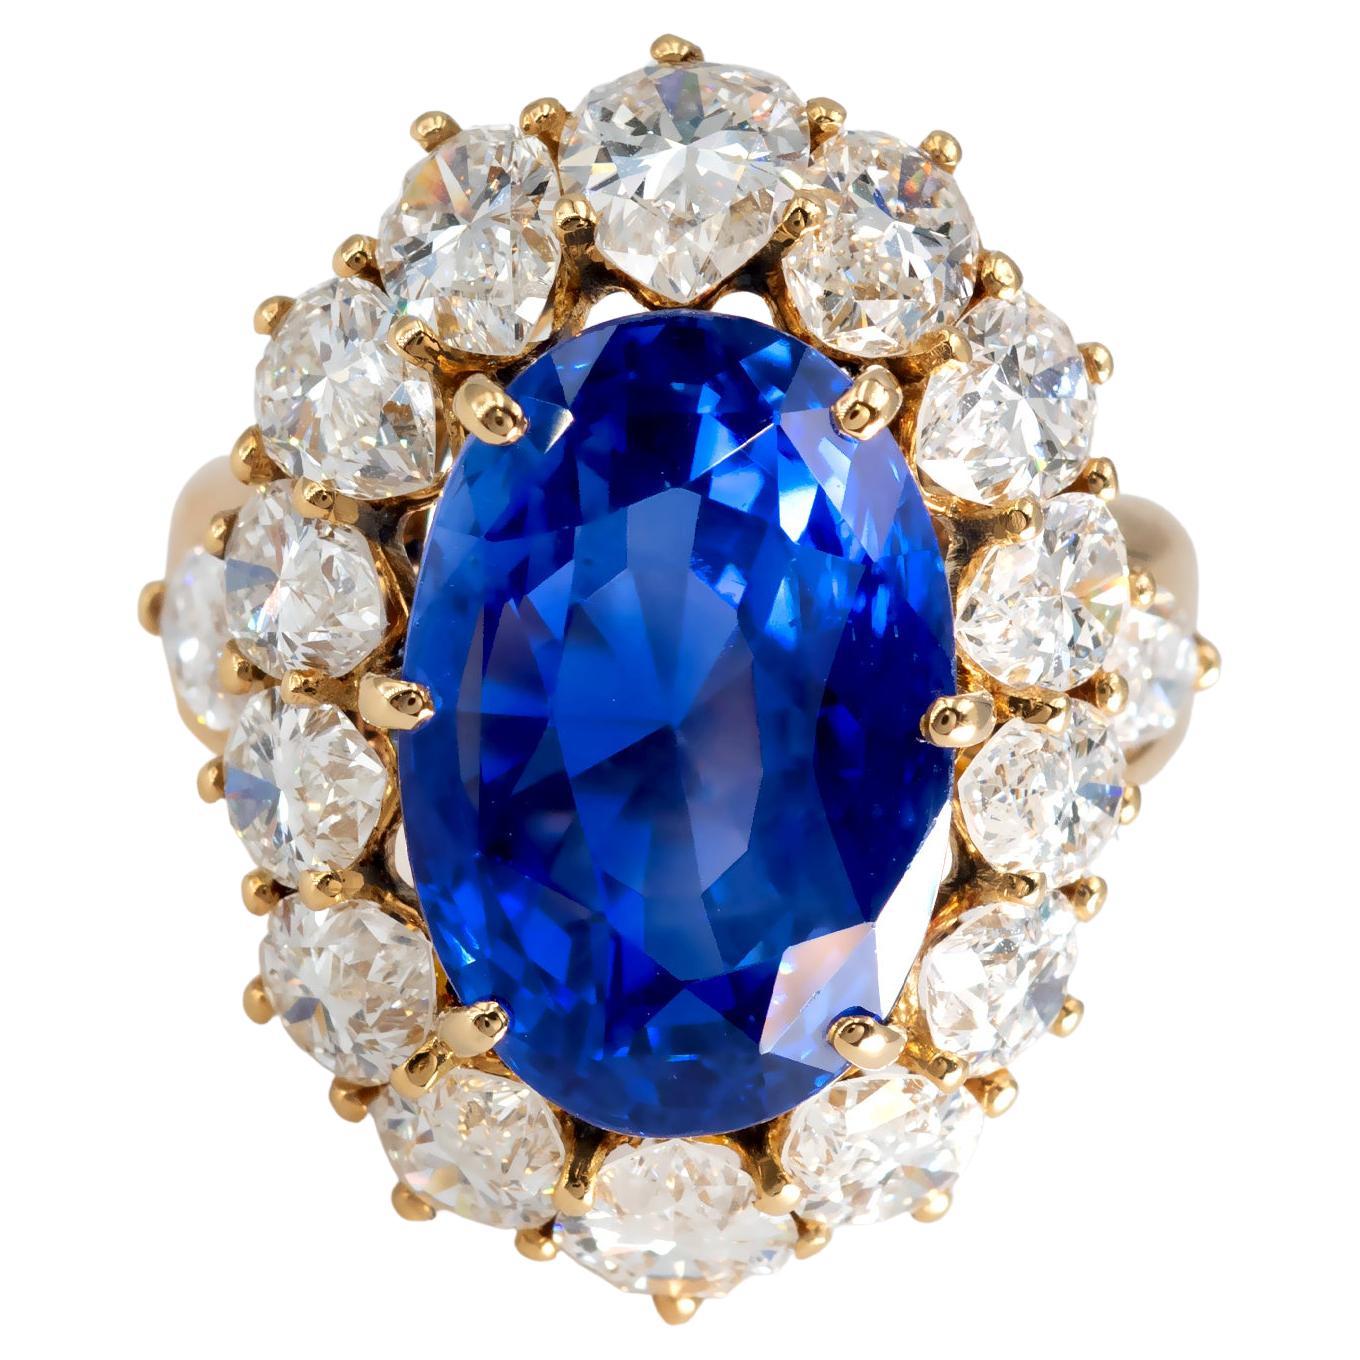 Amazing 17,38 carat Natural unheated Royal blue Sri Lankan (Ceylon) sapphire set in a one of a kind 18 karat gold ring. 
The Sapphire comes with a gem report (certificate) from GRS stating that it is unheated and that it is of the most desired Royal